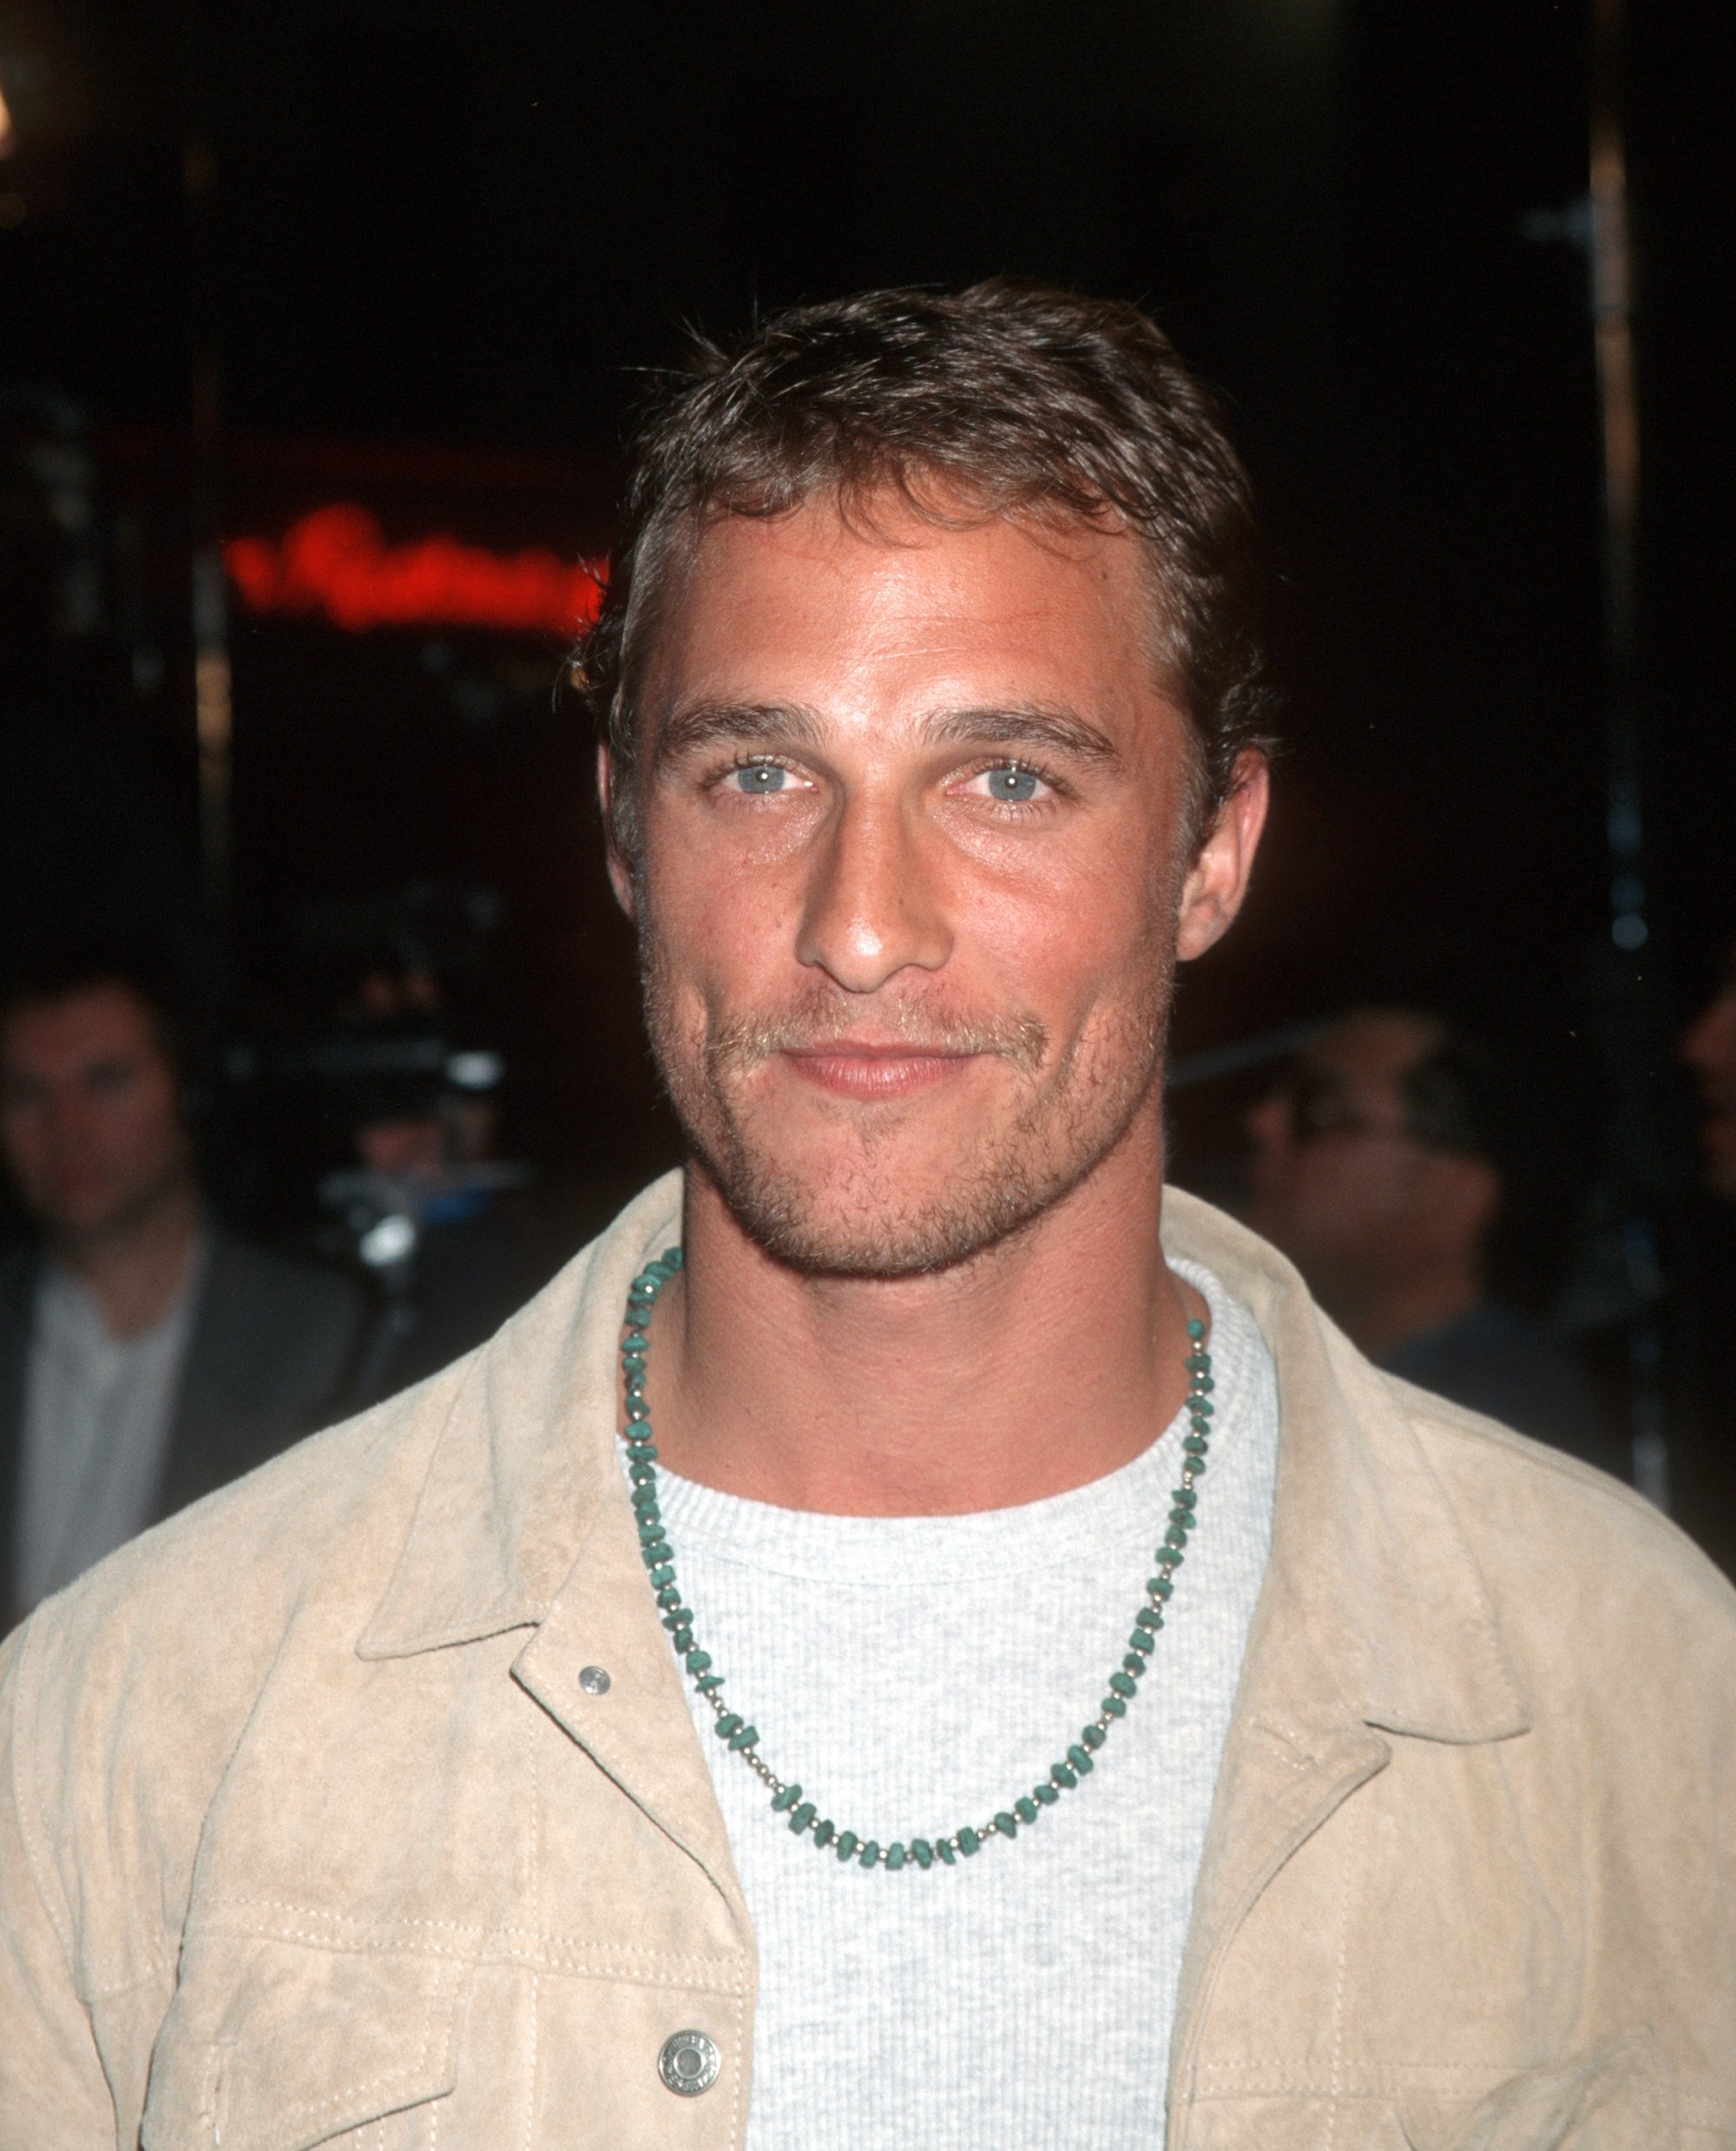 Matthew McConaughey wearing a blue necklace